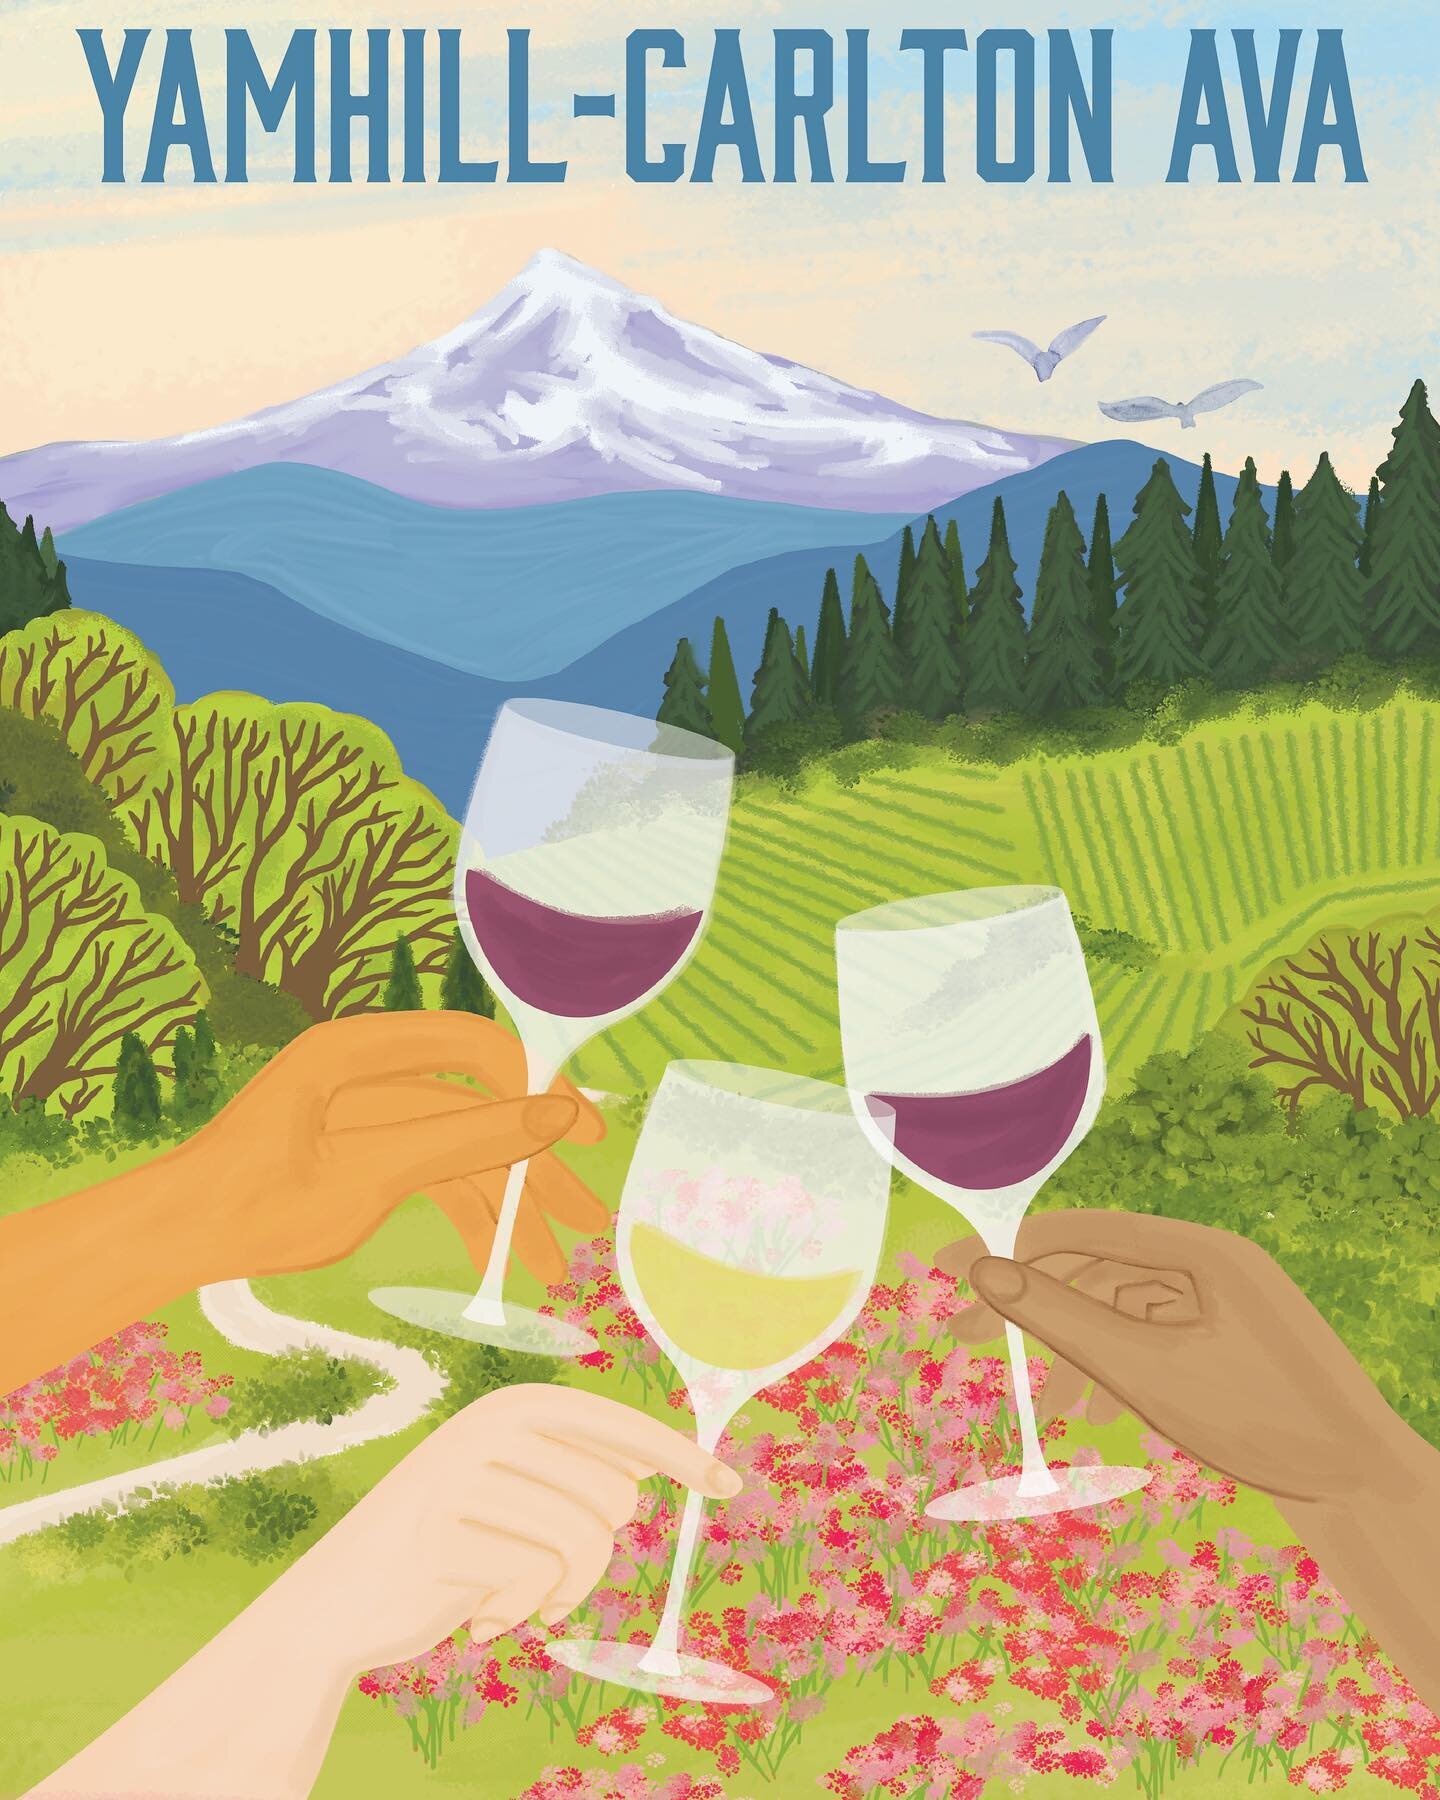 The AVA tasting is coming! Celebrate all the great wines made in Yamhill-Carlton AVA at our annual Spring Tasting. 

April 20th at Abbey Road Farm!

Get your tickets today!